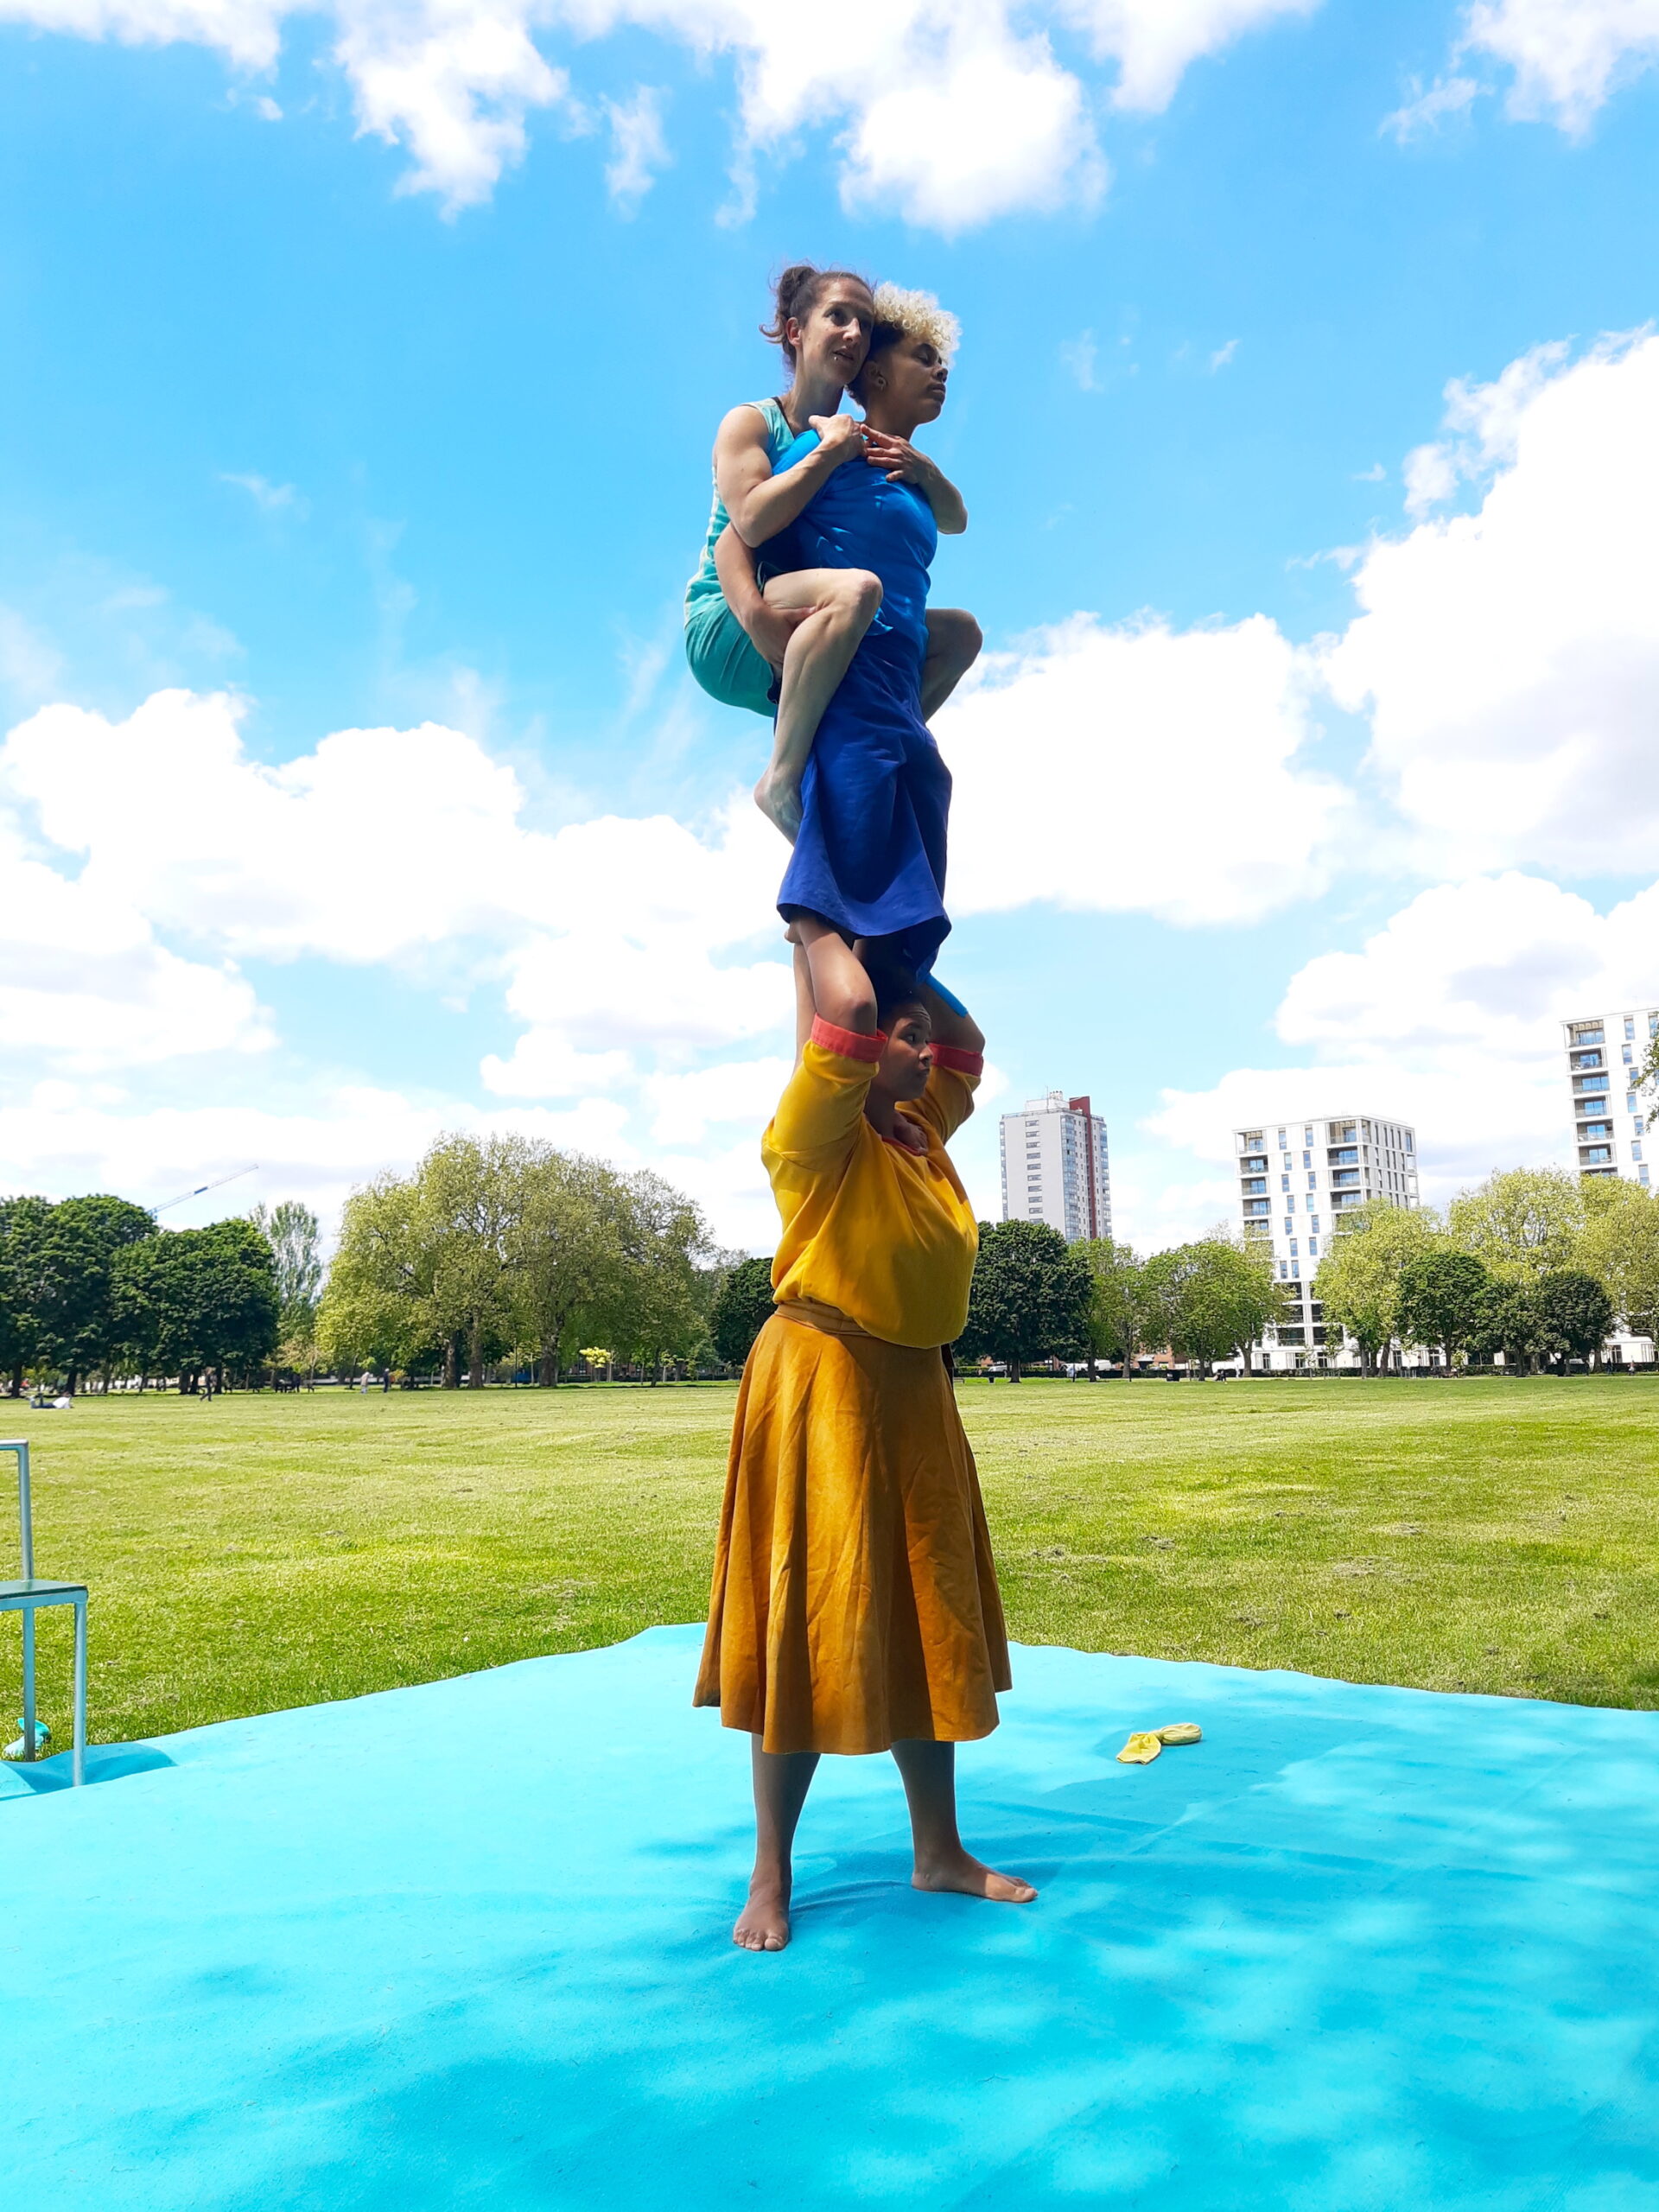 3 acrobats perform an acrobalance trick. 2 women on the shoulders of a third woman